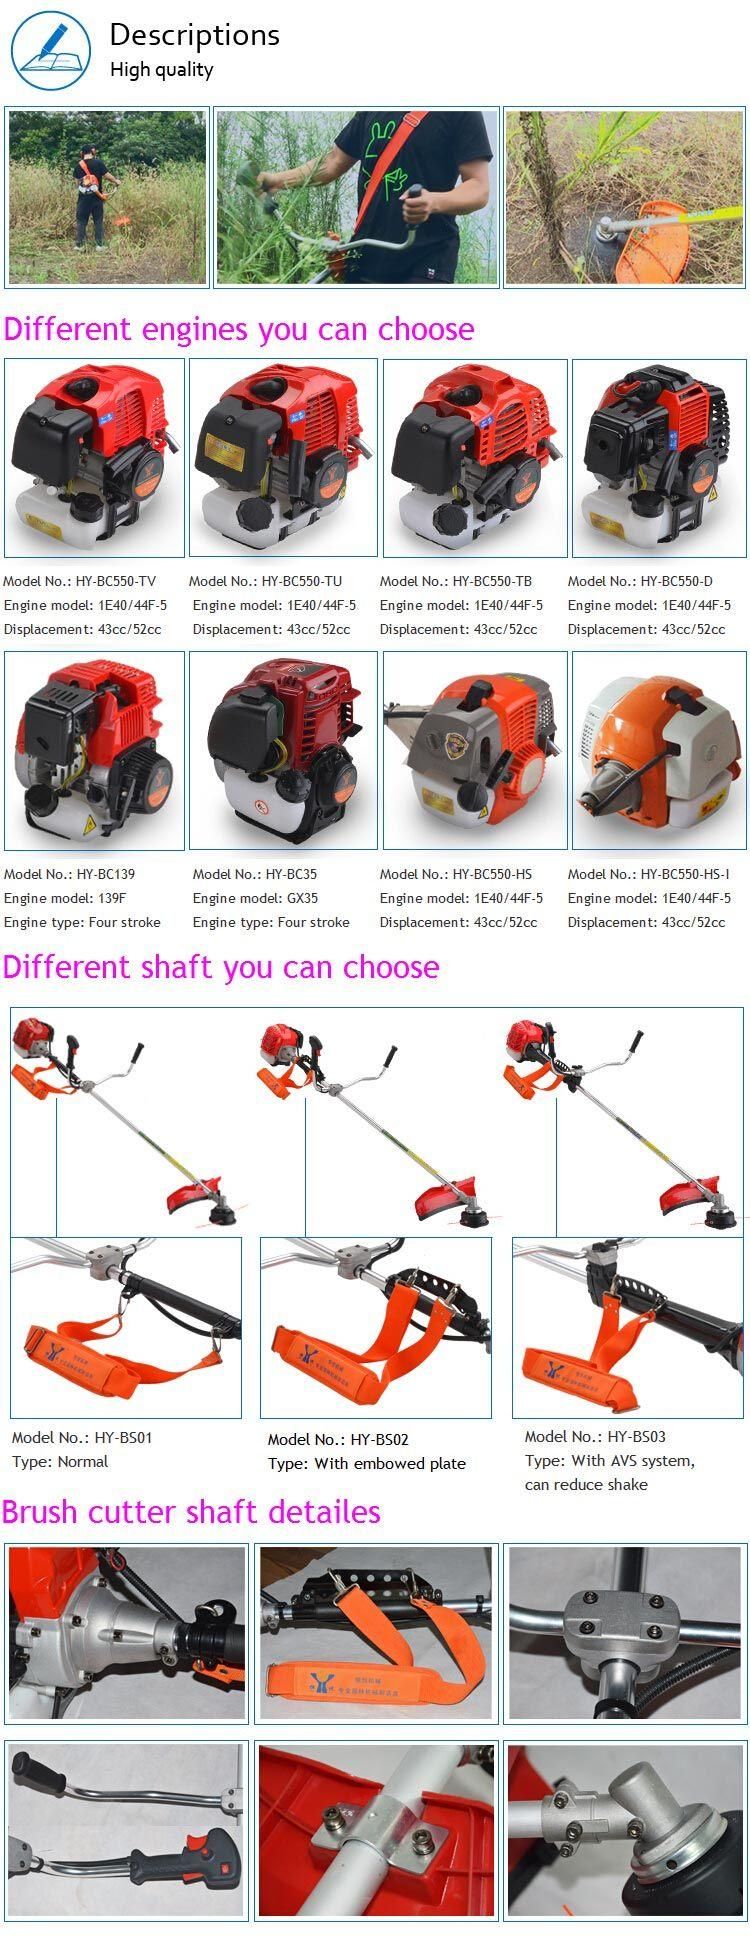 Hengyue Brush Cutter with High Quality